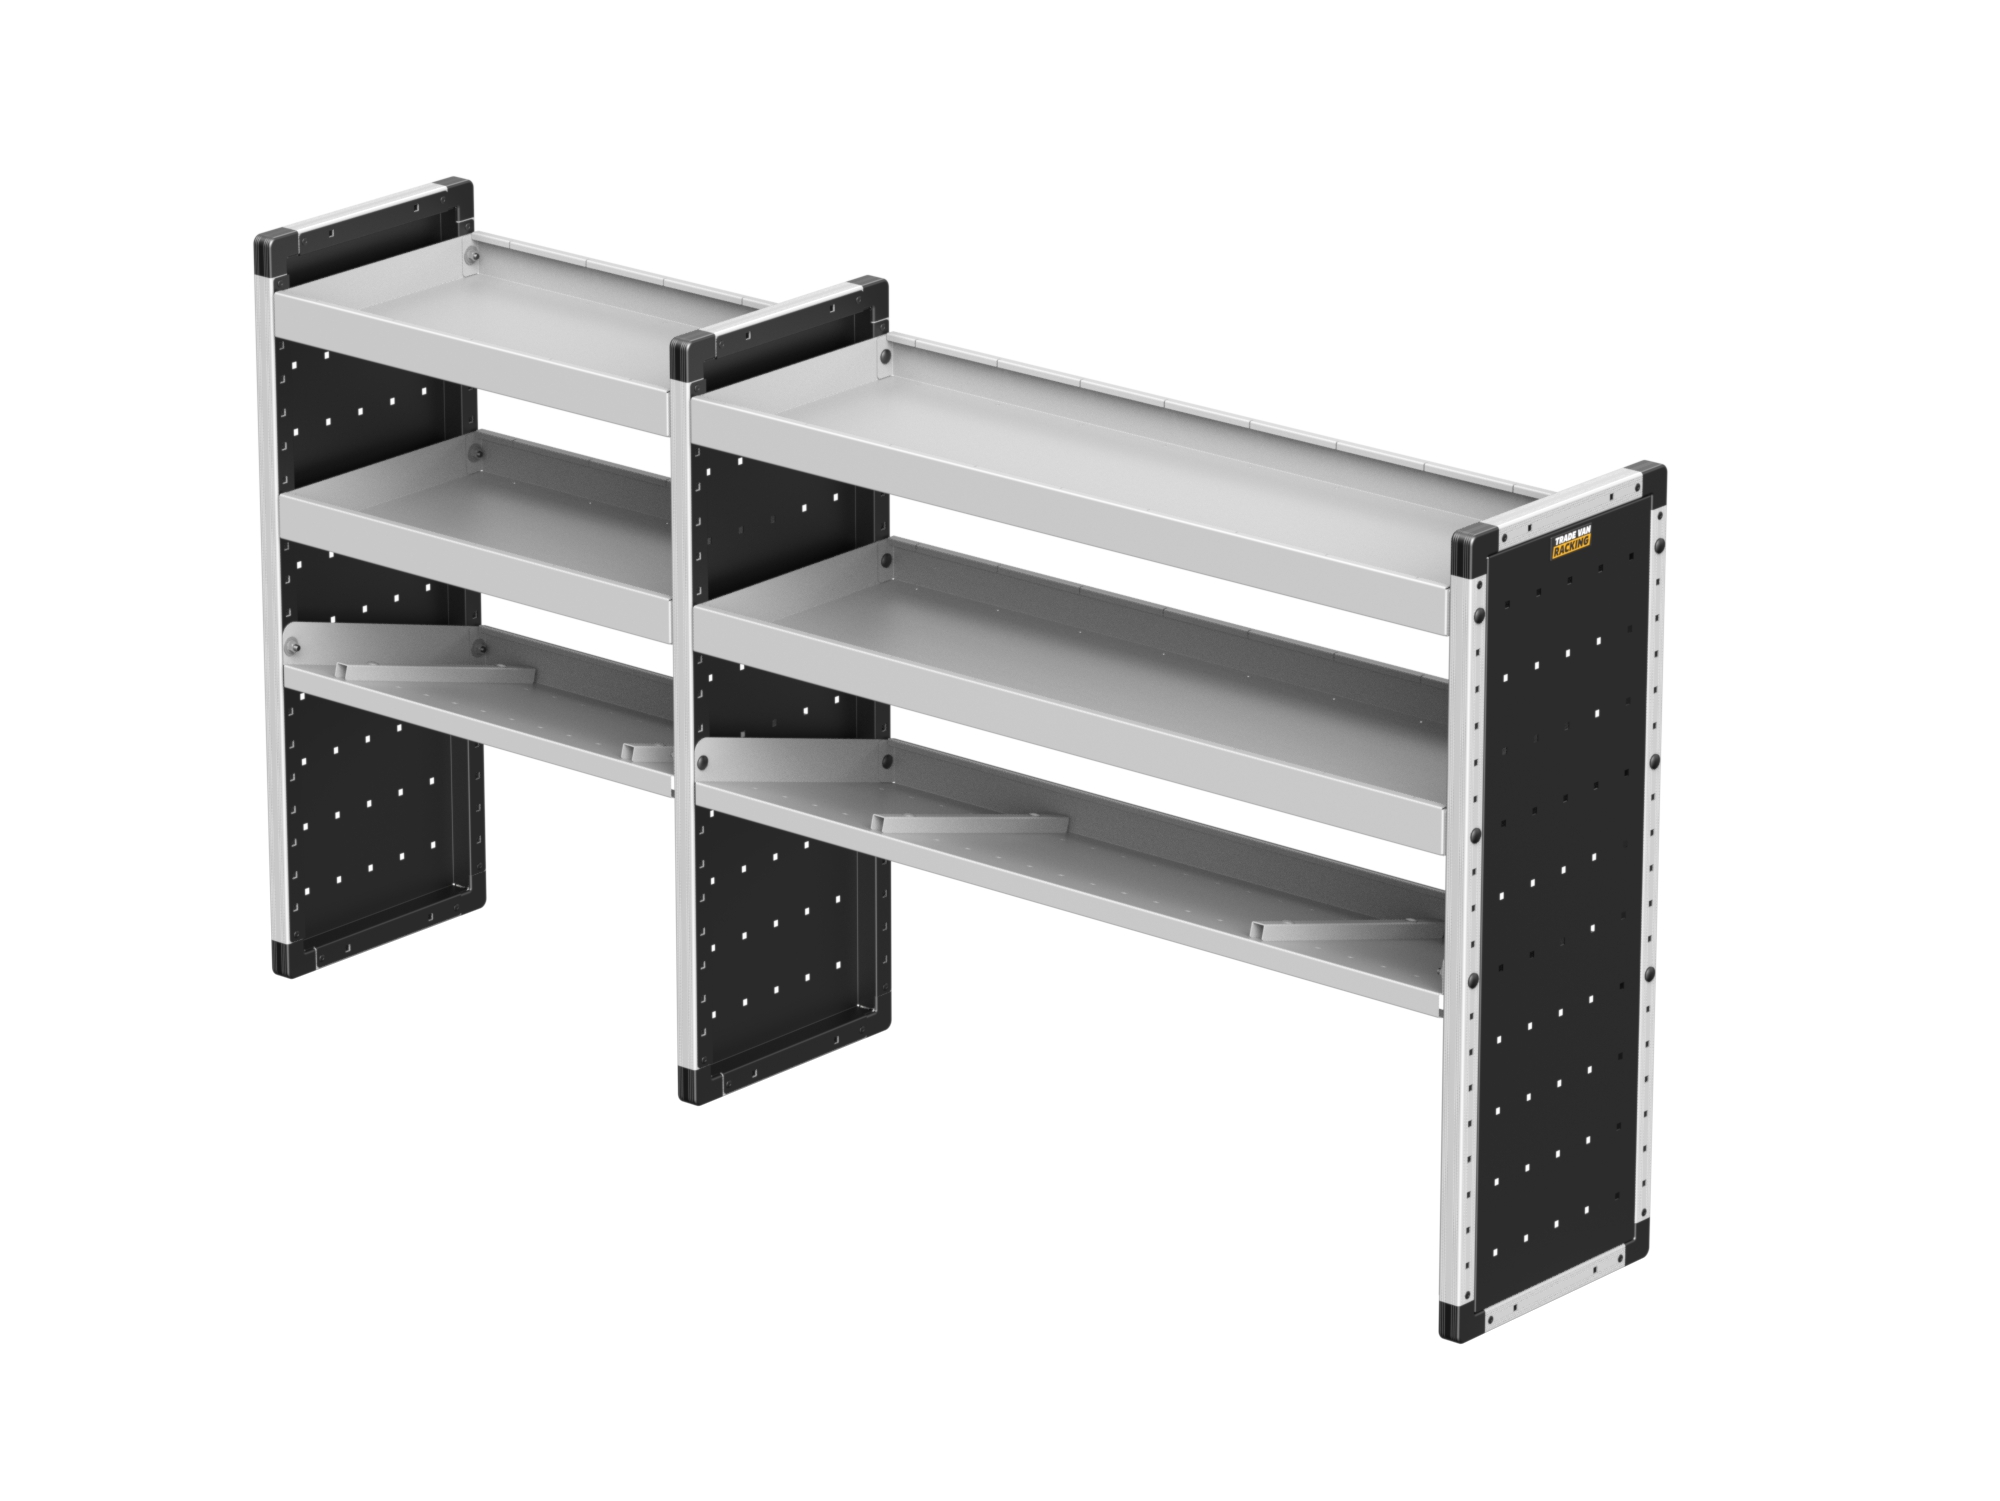 Trade Van Racking - Double Unit - 2 straight & 1 angled per bay - TVR-DBL-003